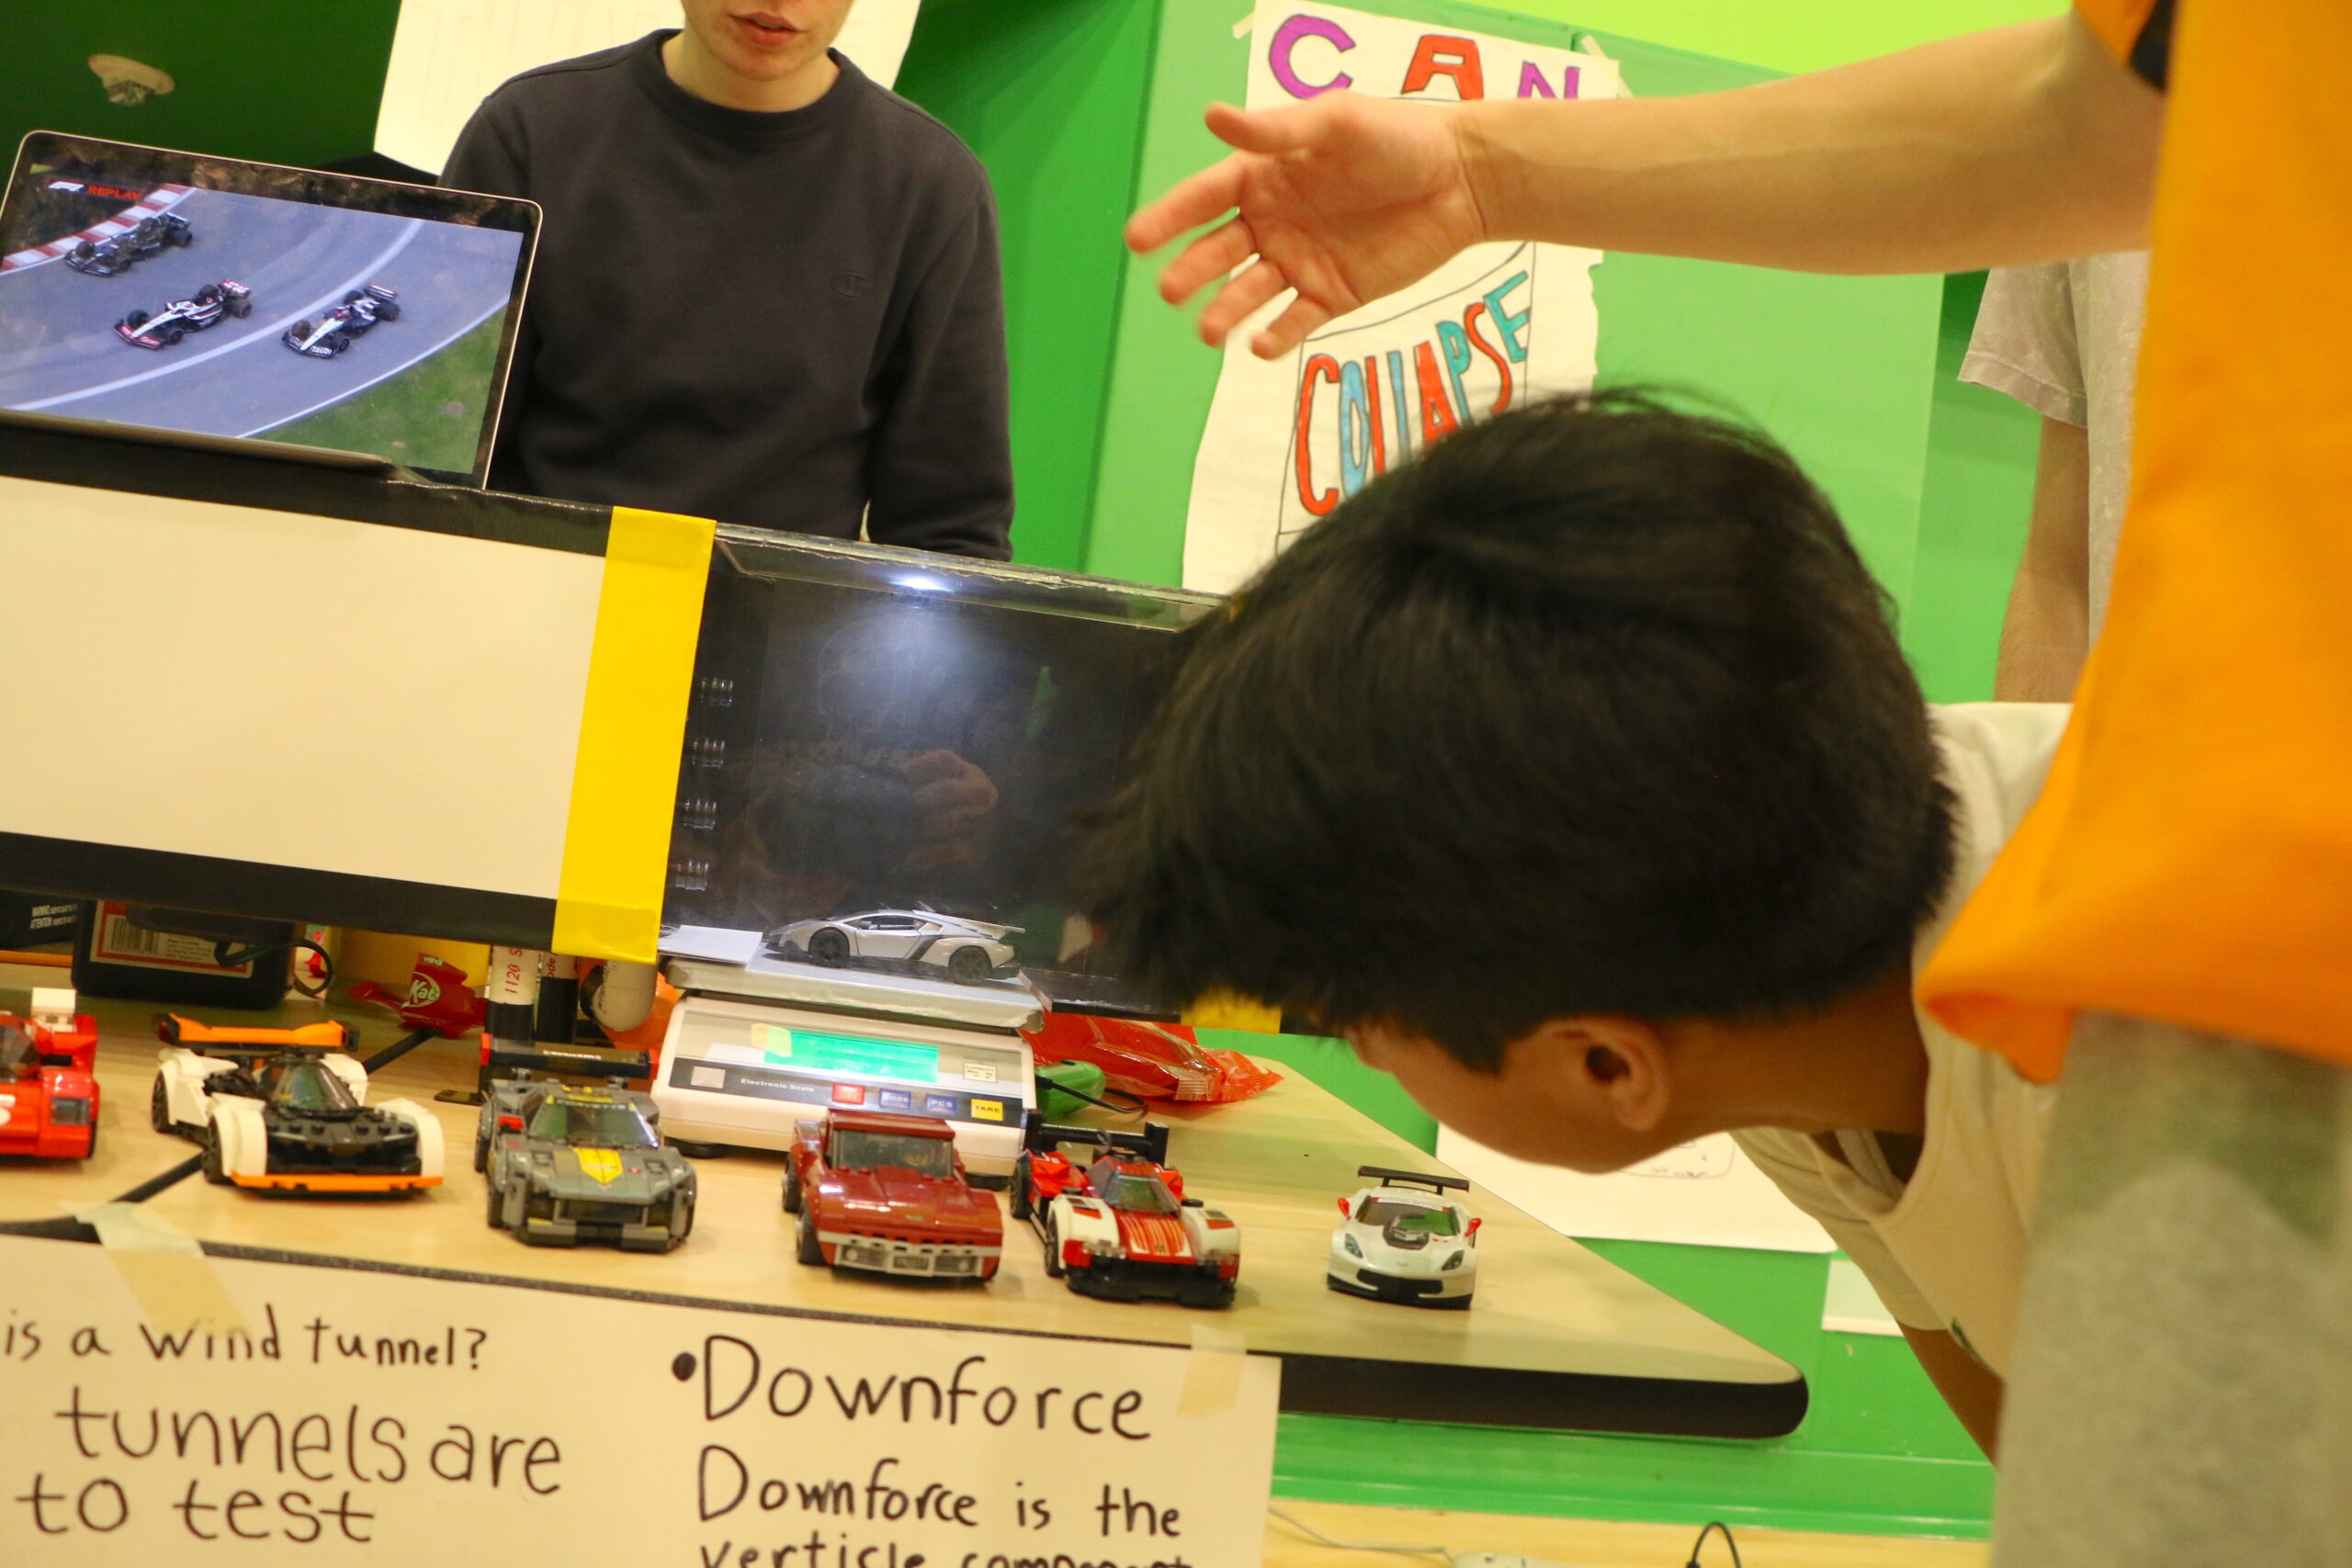 Students looking at toy cars